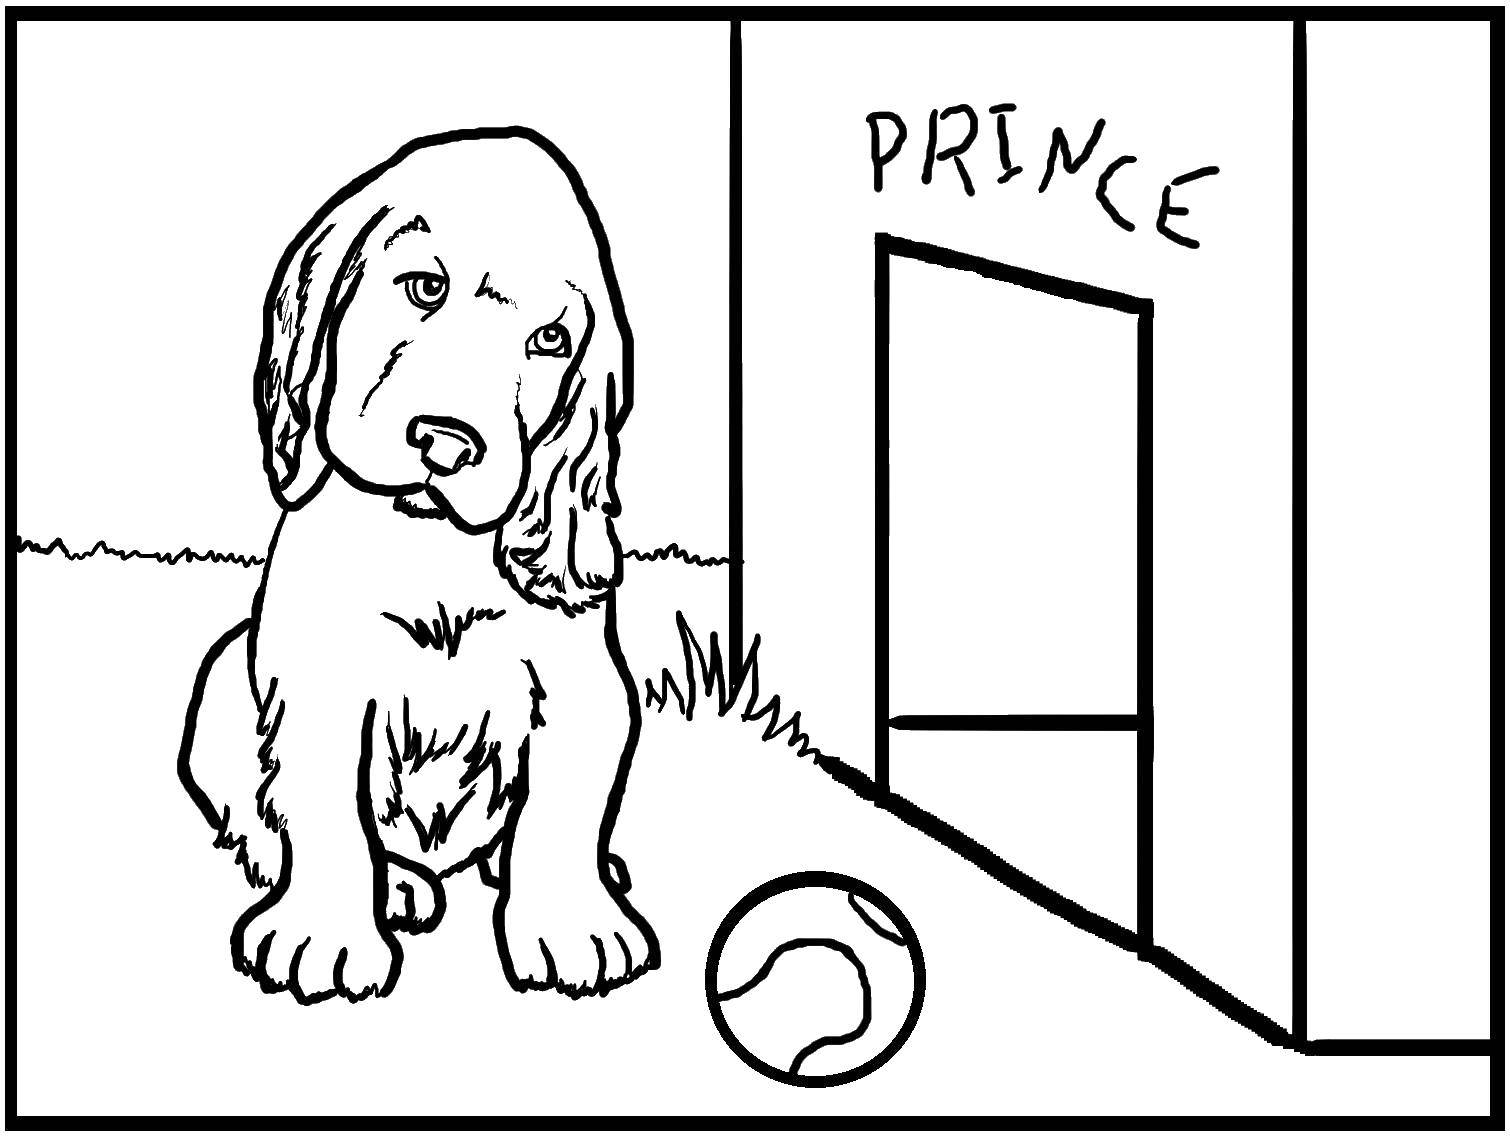 Coloring Booth Prince. Category Animals. Tags:  Animals, dog.